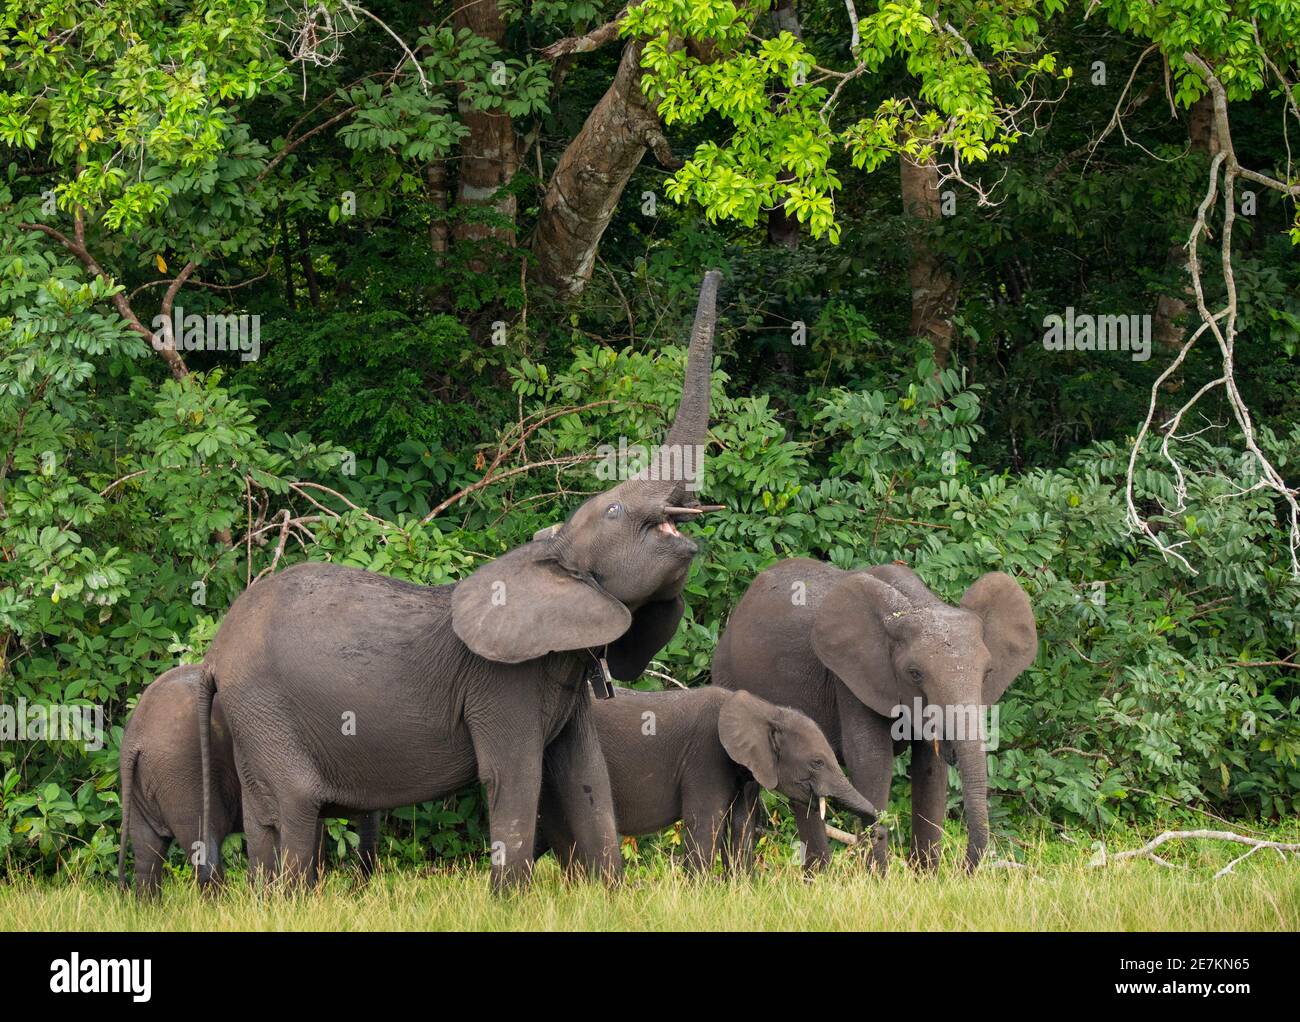 African forest elephant (Loxodonta cyclotis), using trunk to reach leaves on tree, Loango National Park, Gabon, central Africa. Stock Photo